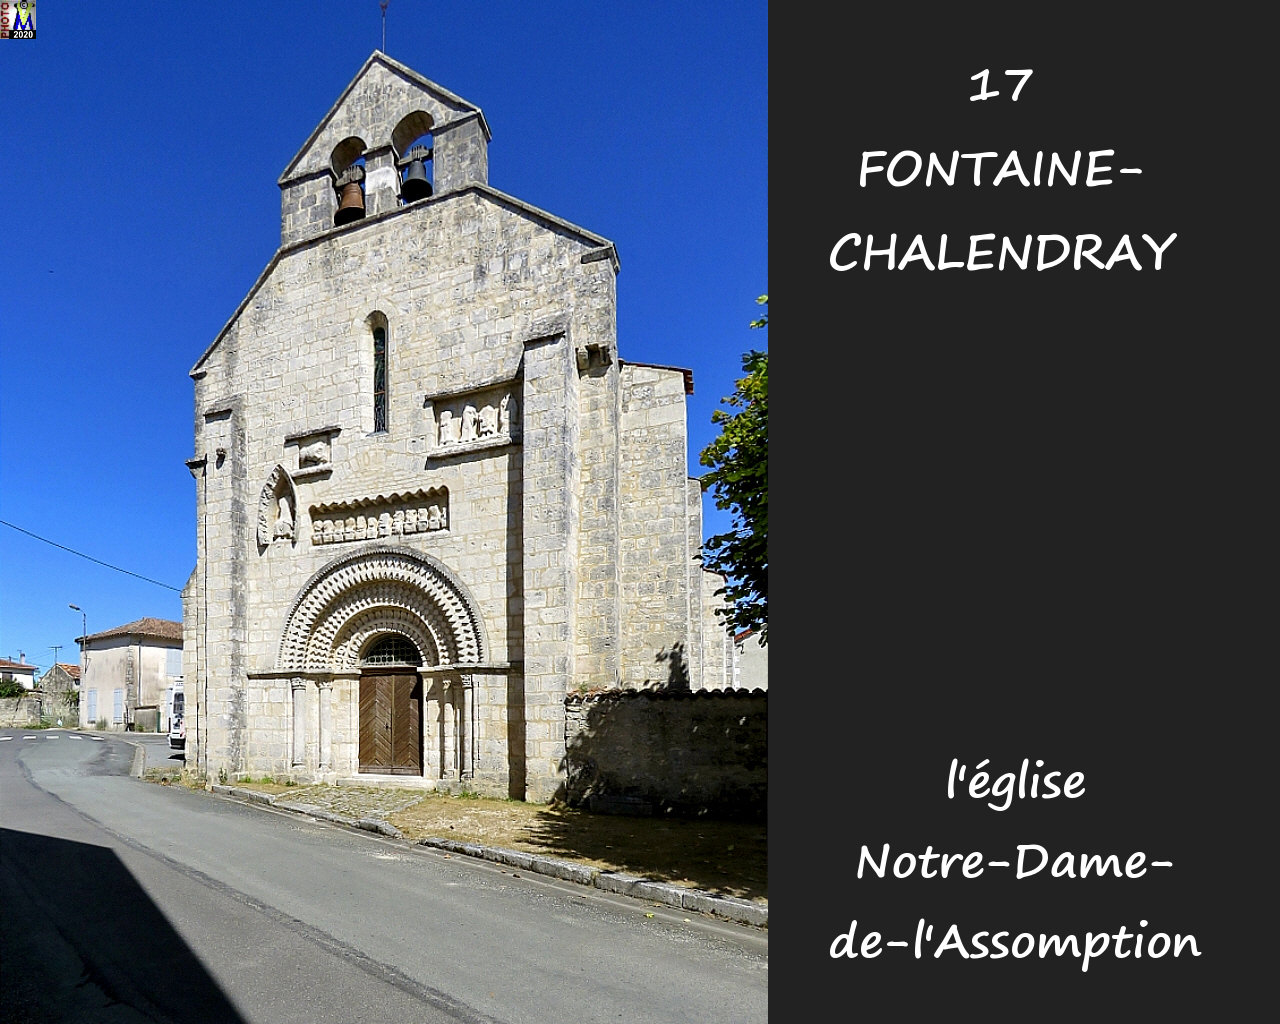 17FONTAINE-CHALENDRAY_eglise_1000.jpg